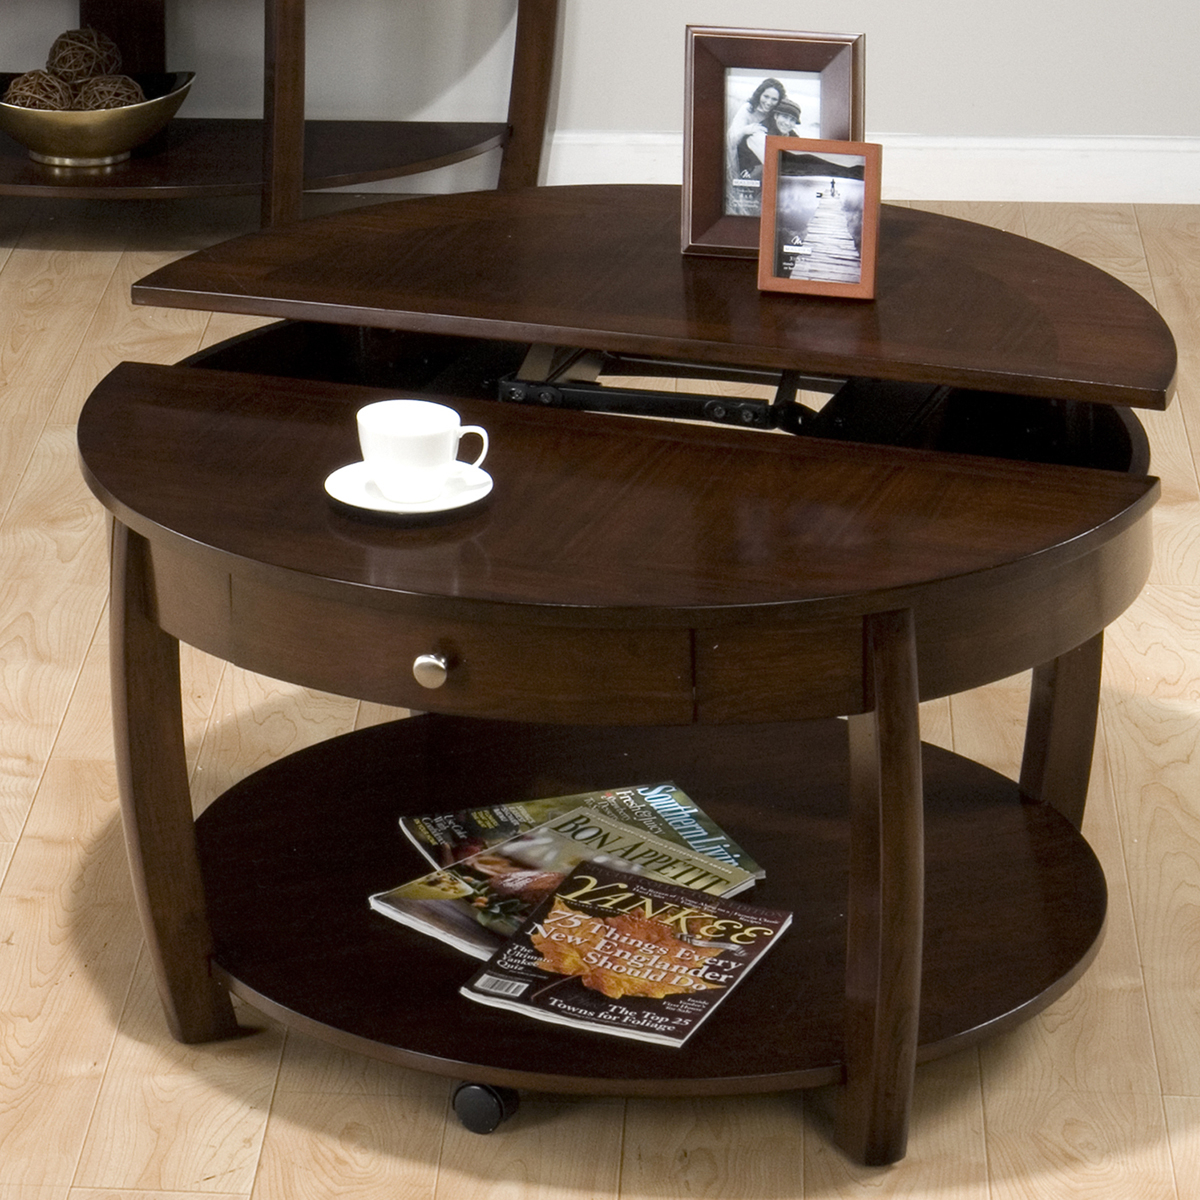 The Round Coffee Tables With Storage The Simple And Compact for dimensions 1200 X 1200